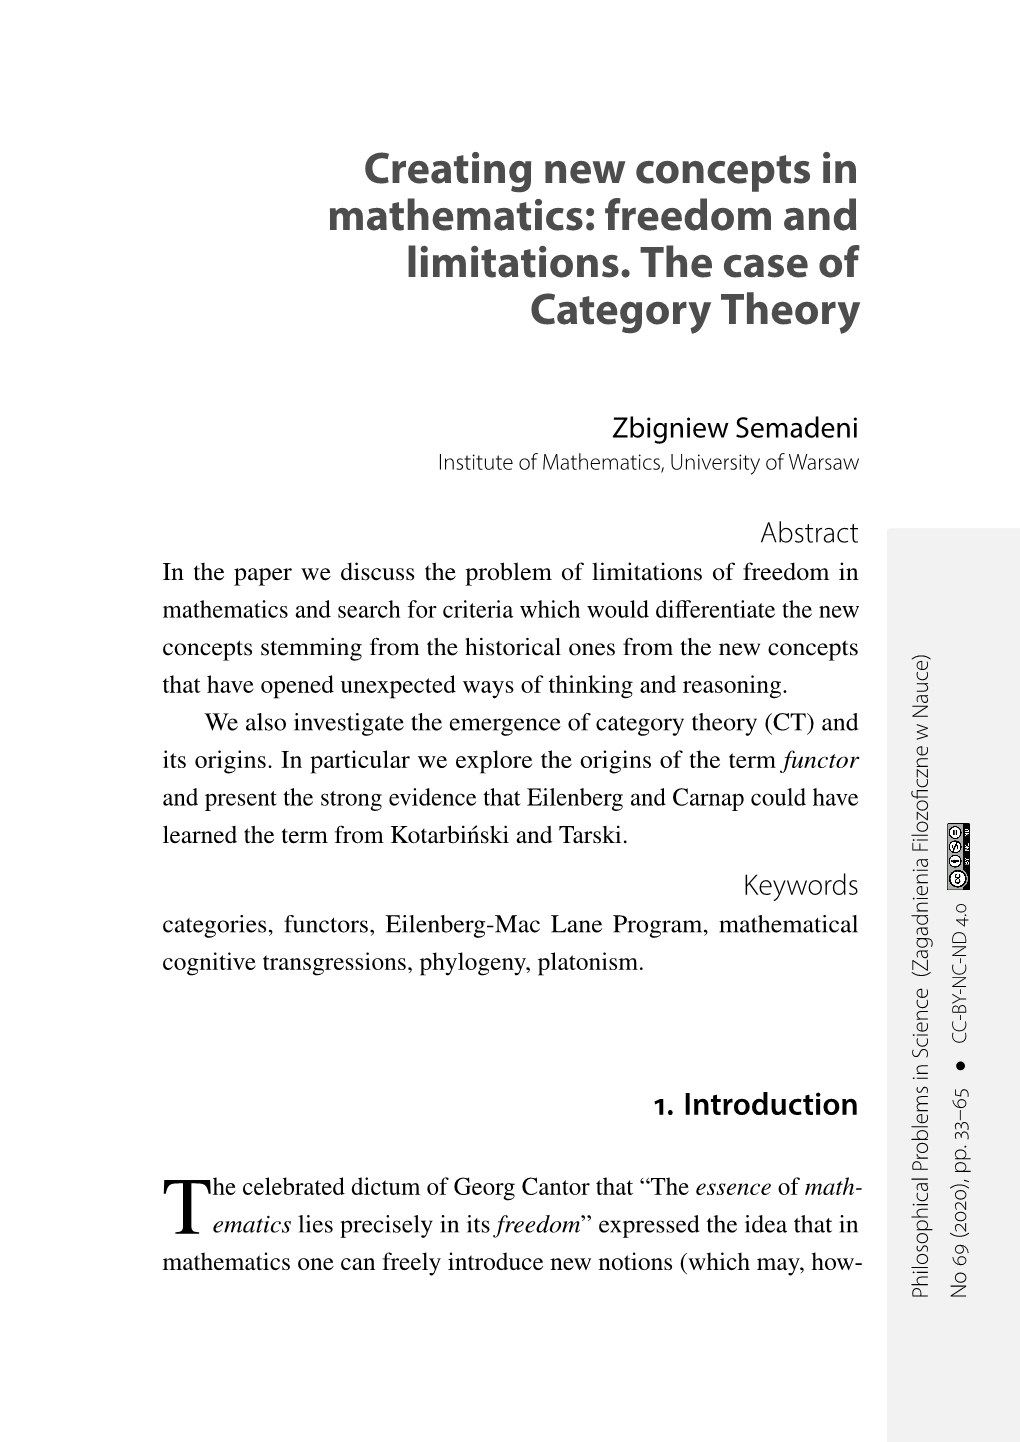 Creating New Concepts in Mathematics: Freedom and Limitations. the Case of Category Theory